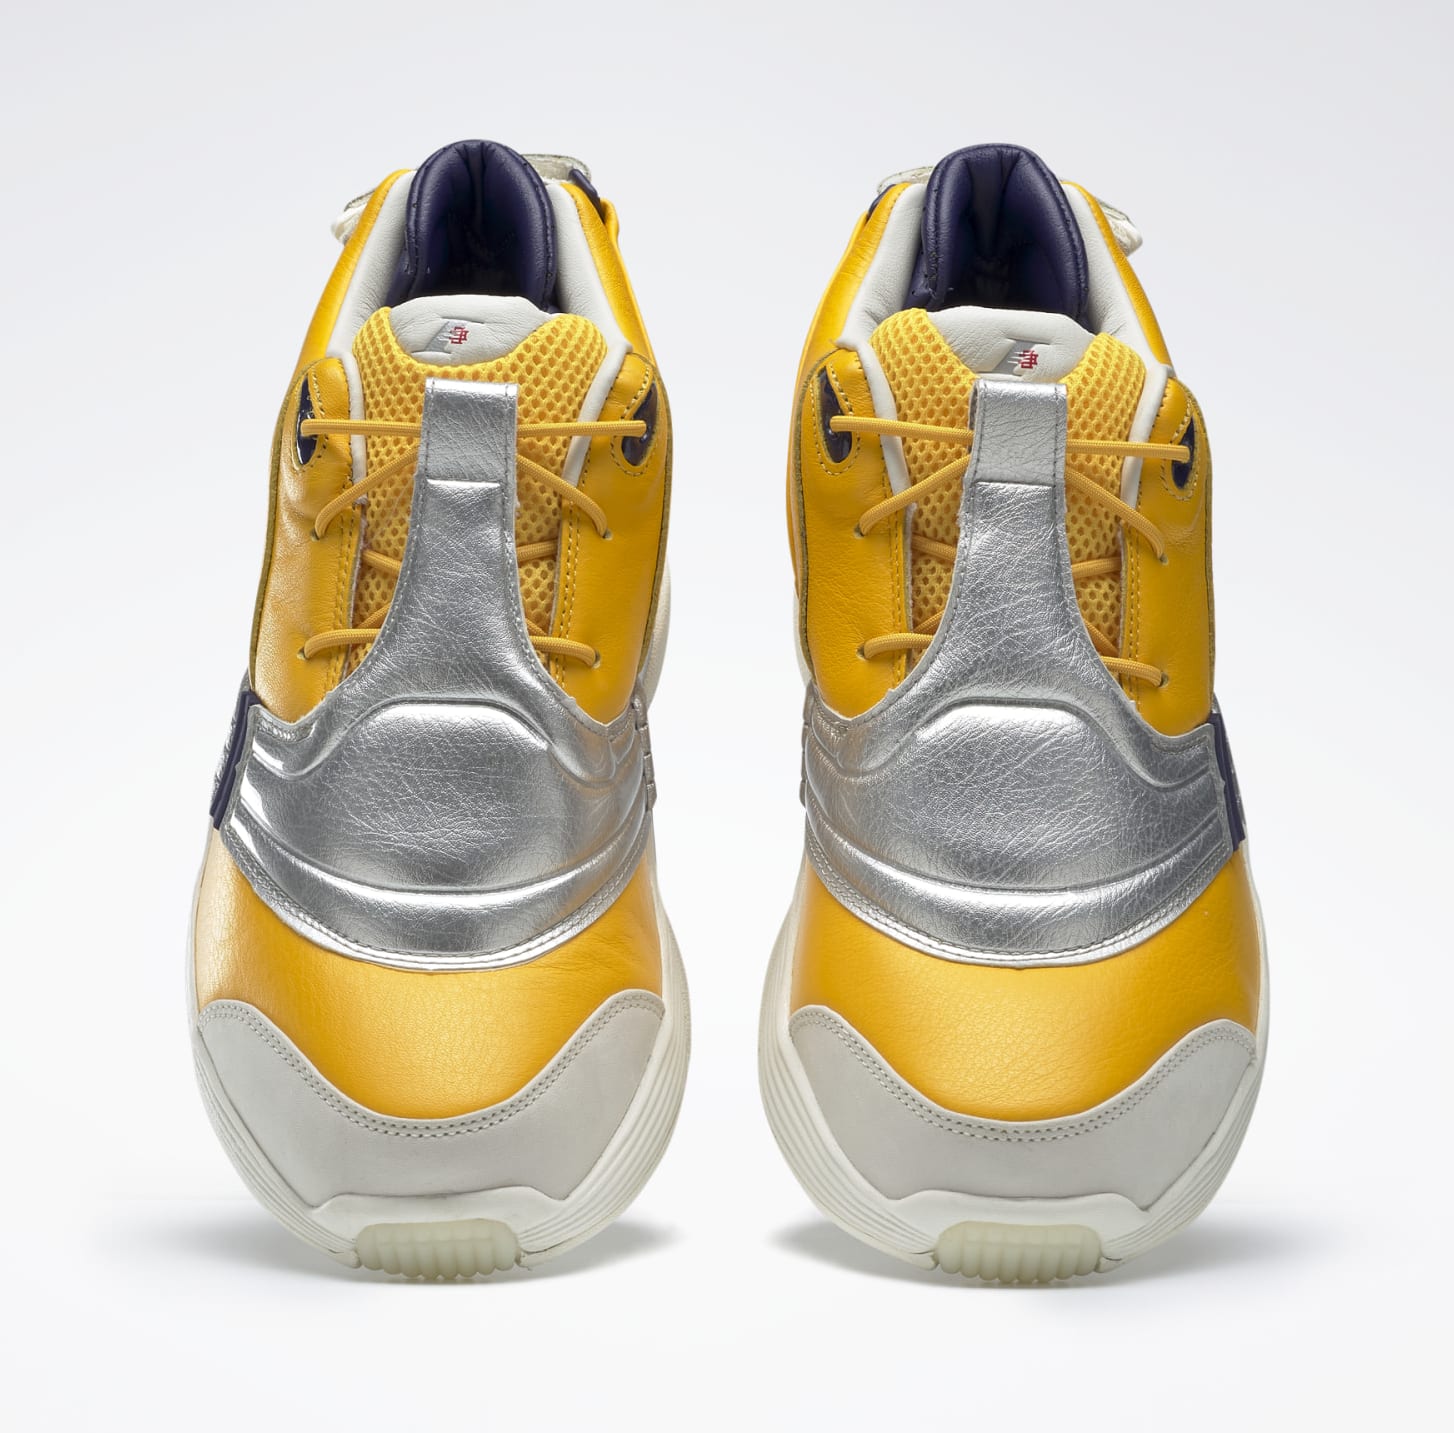 Eric Emanuel x Reebok Answer V &#x27;Track Gold&#x27; EH0408 Front